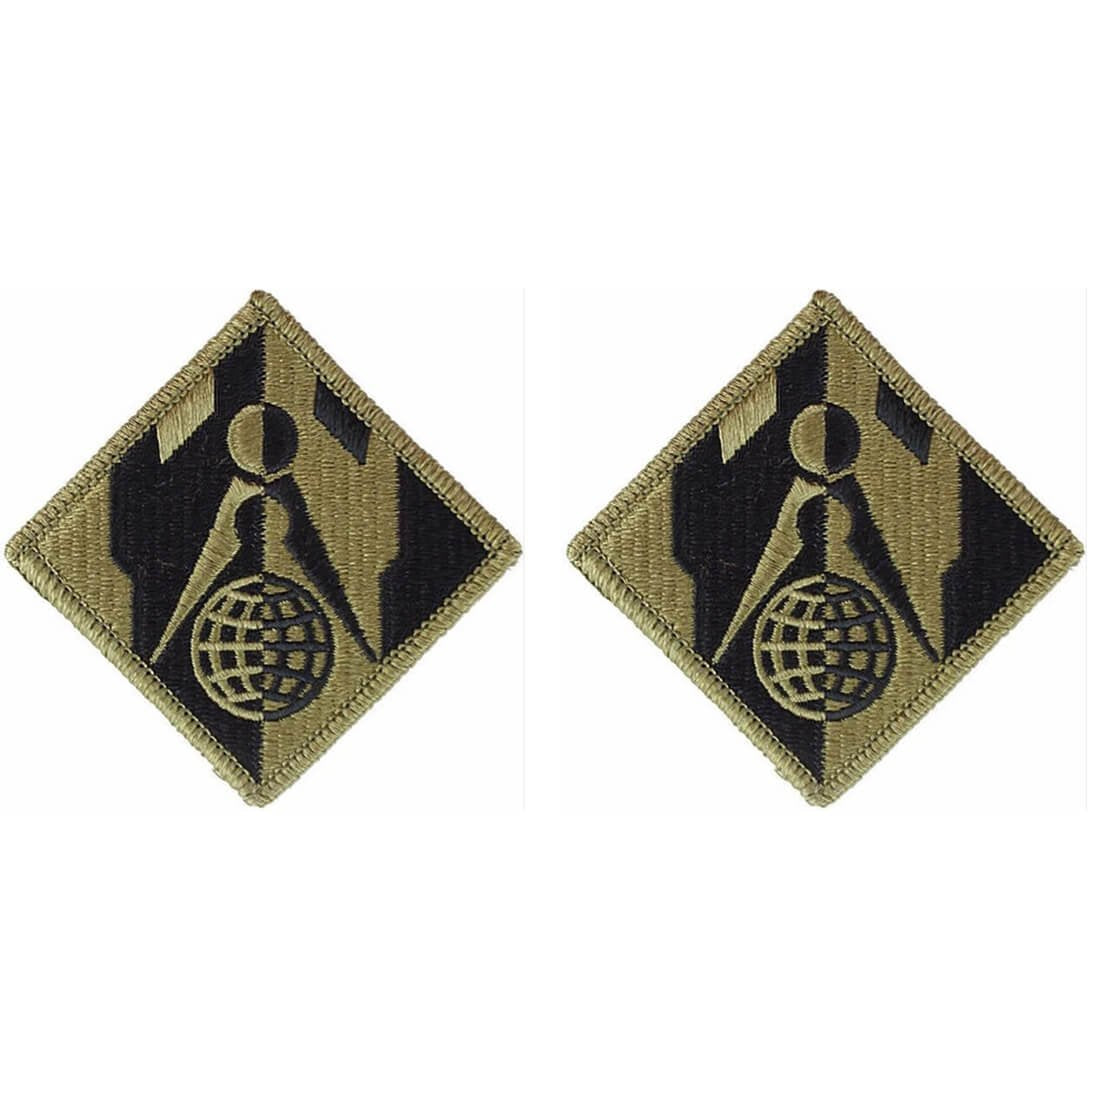 Corps of Engineers Army OCP Patch with Hook Fastener - Pair